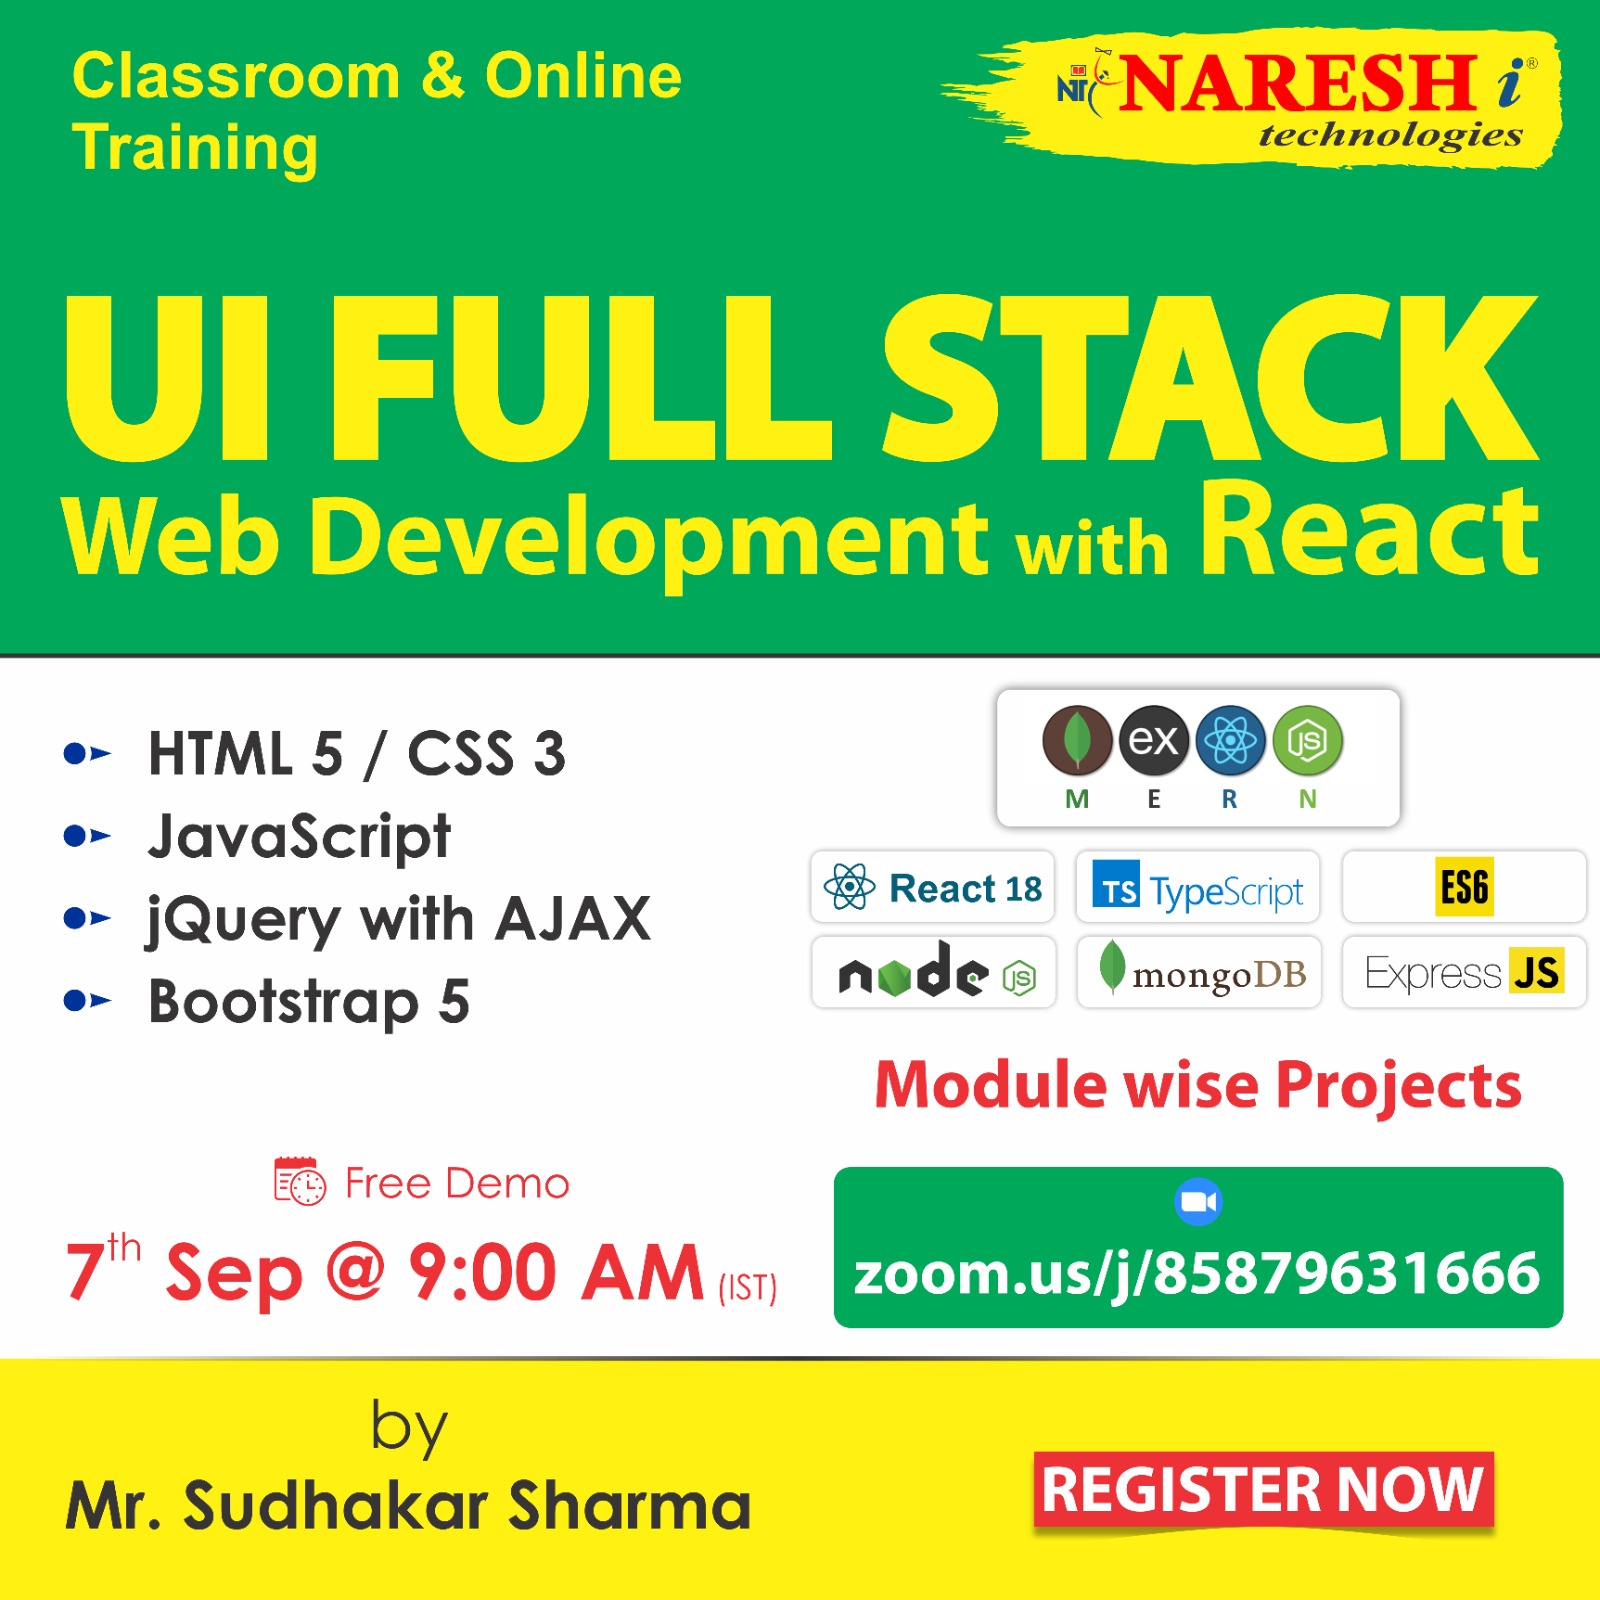 Free Demo On UI Full Stack Web Development with react - Naresh IT, Online Event